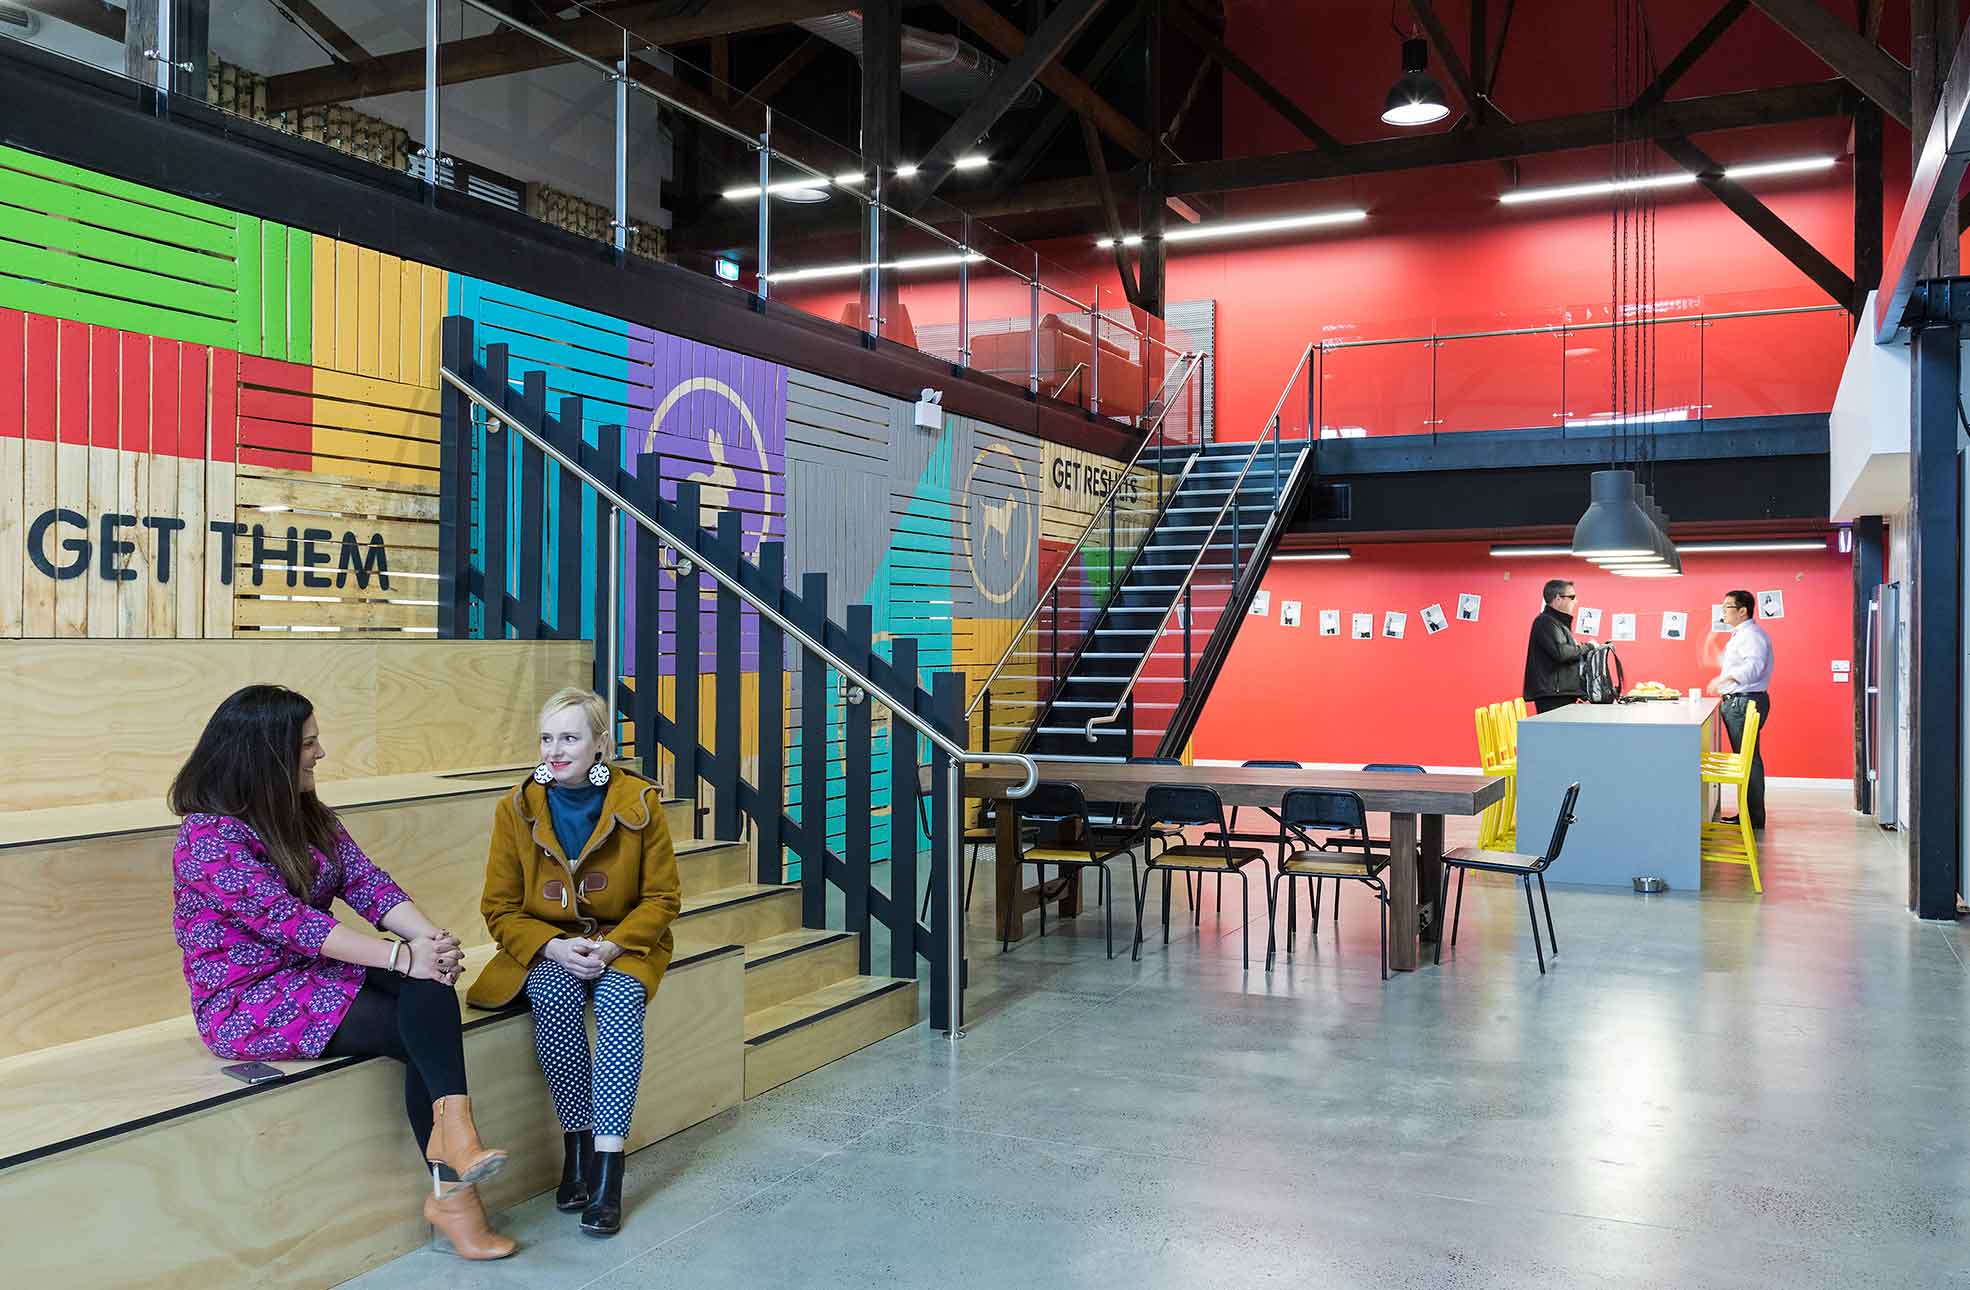 Modern warehouse fitout with 2 women sitting chatting